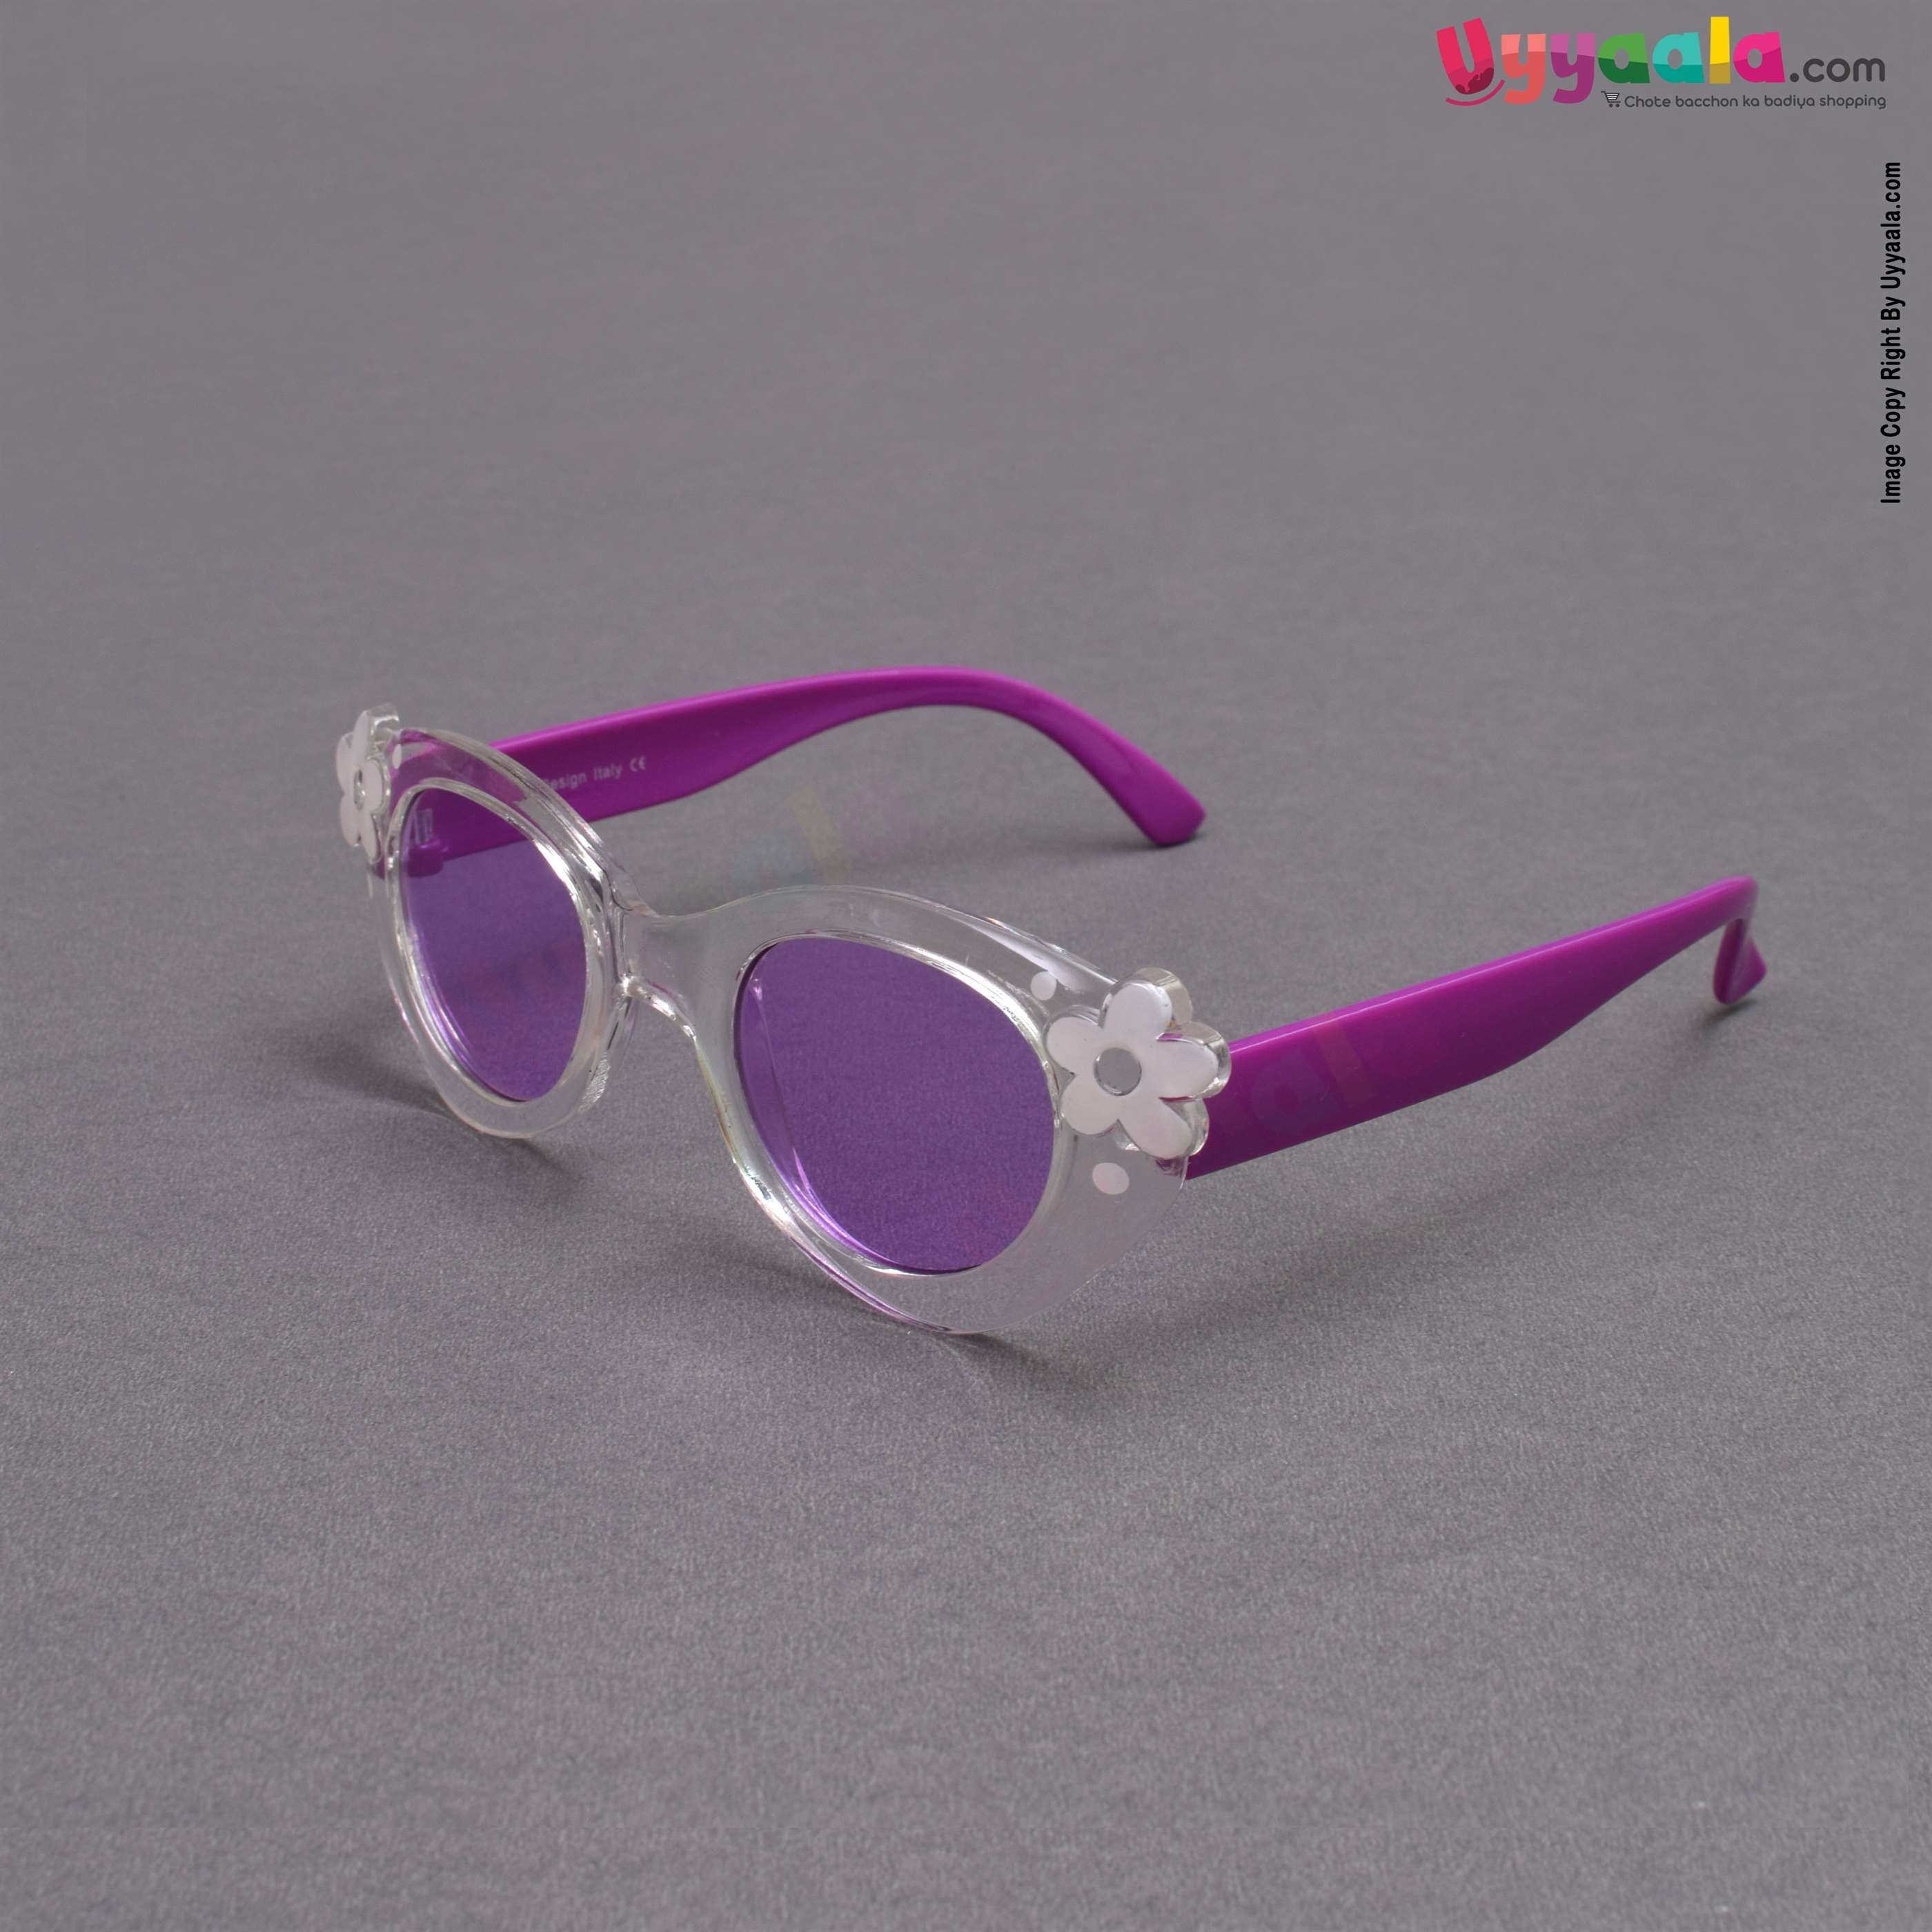 Stylish cat eye shaped purple shade sunglasses for kids - purple with flower patch, 1 - 10 years